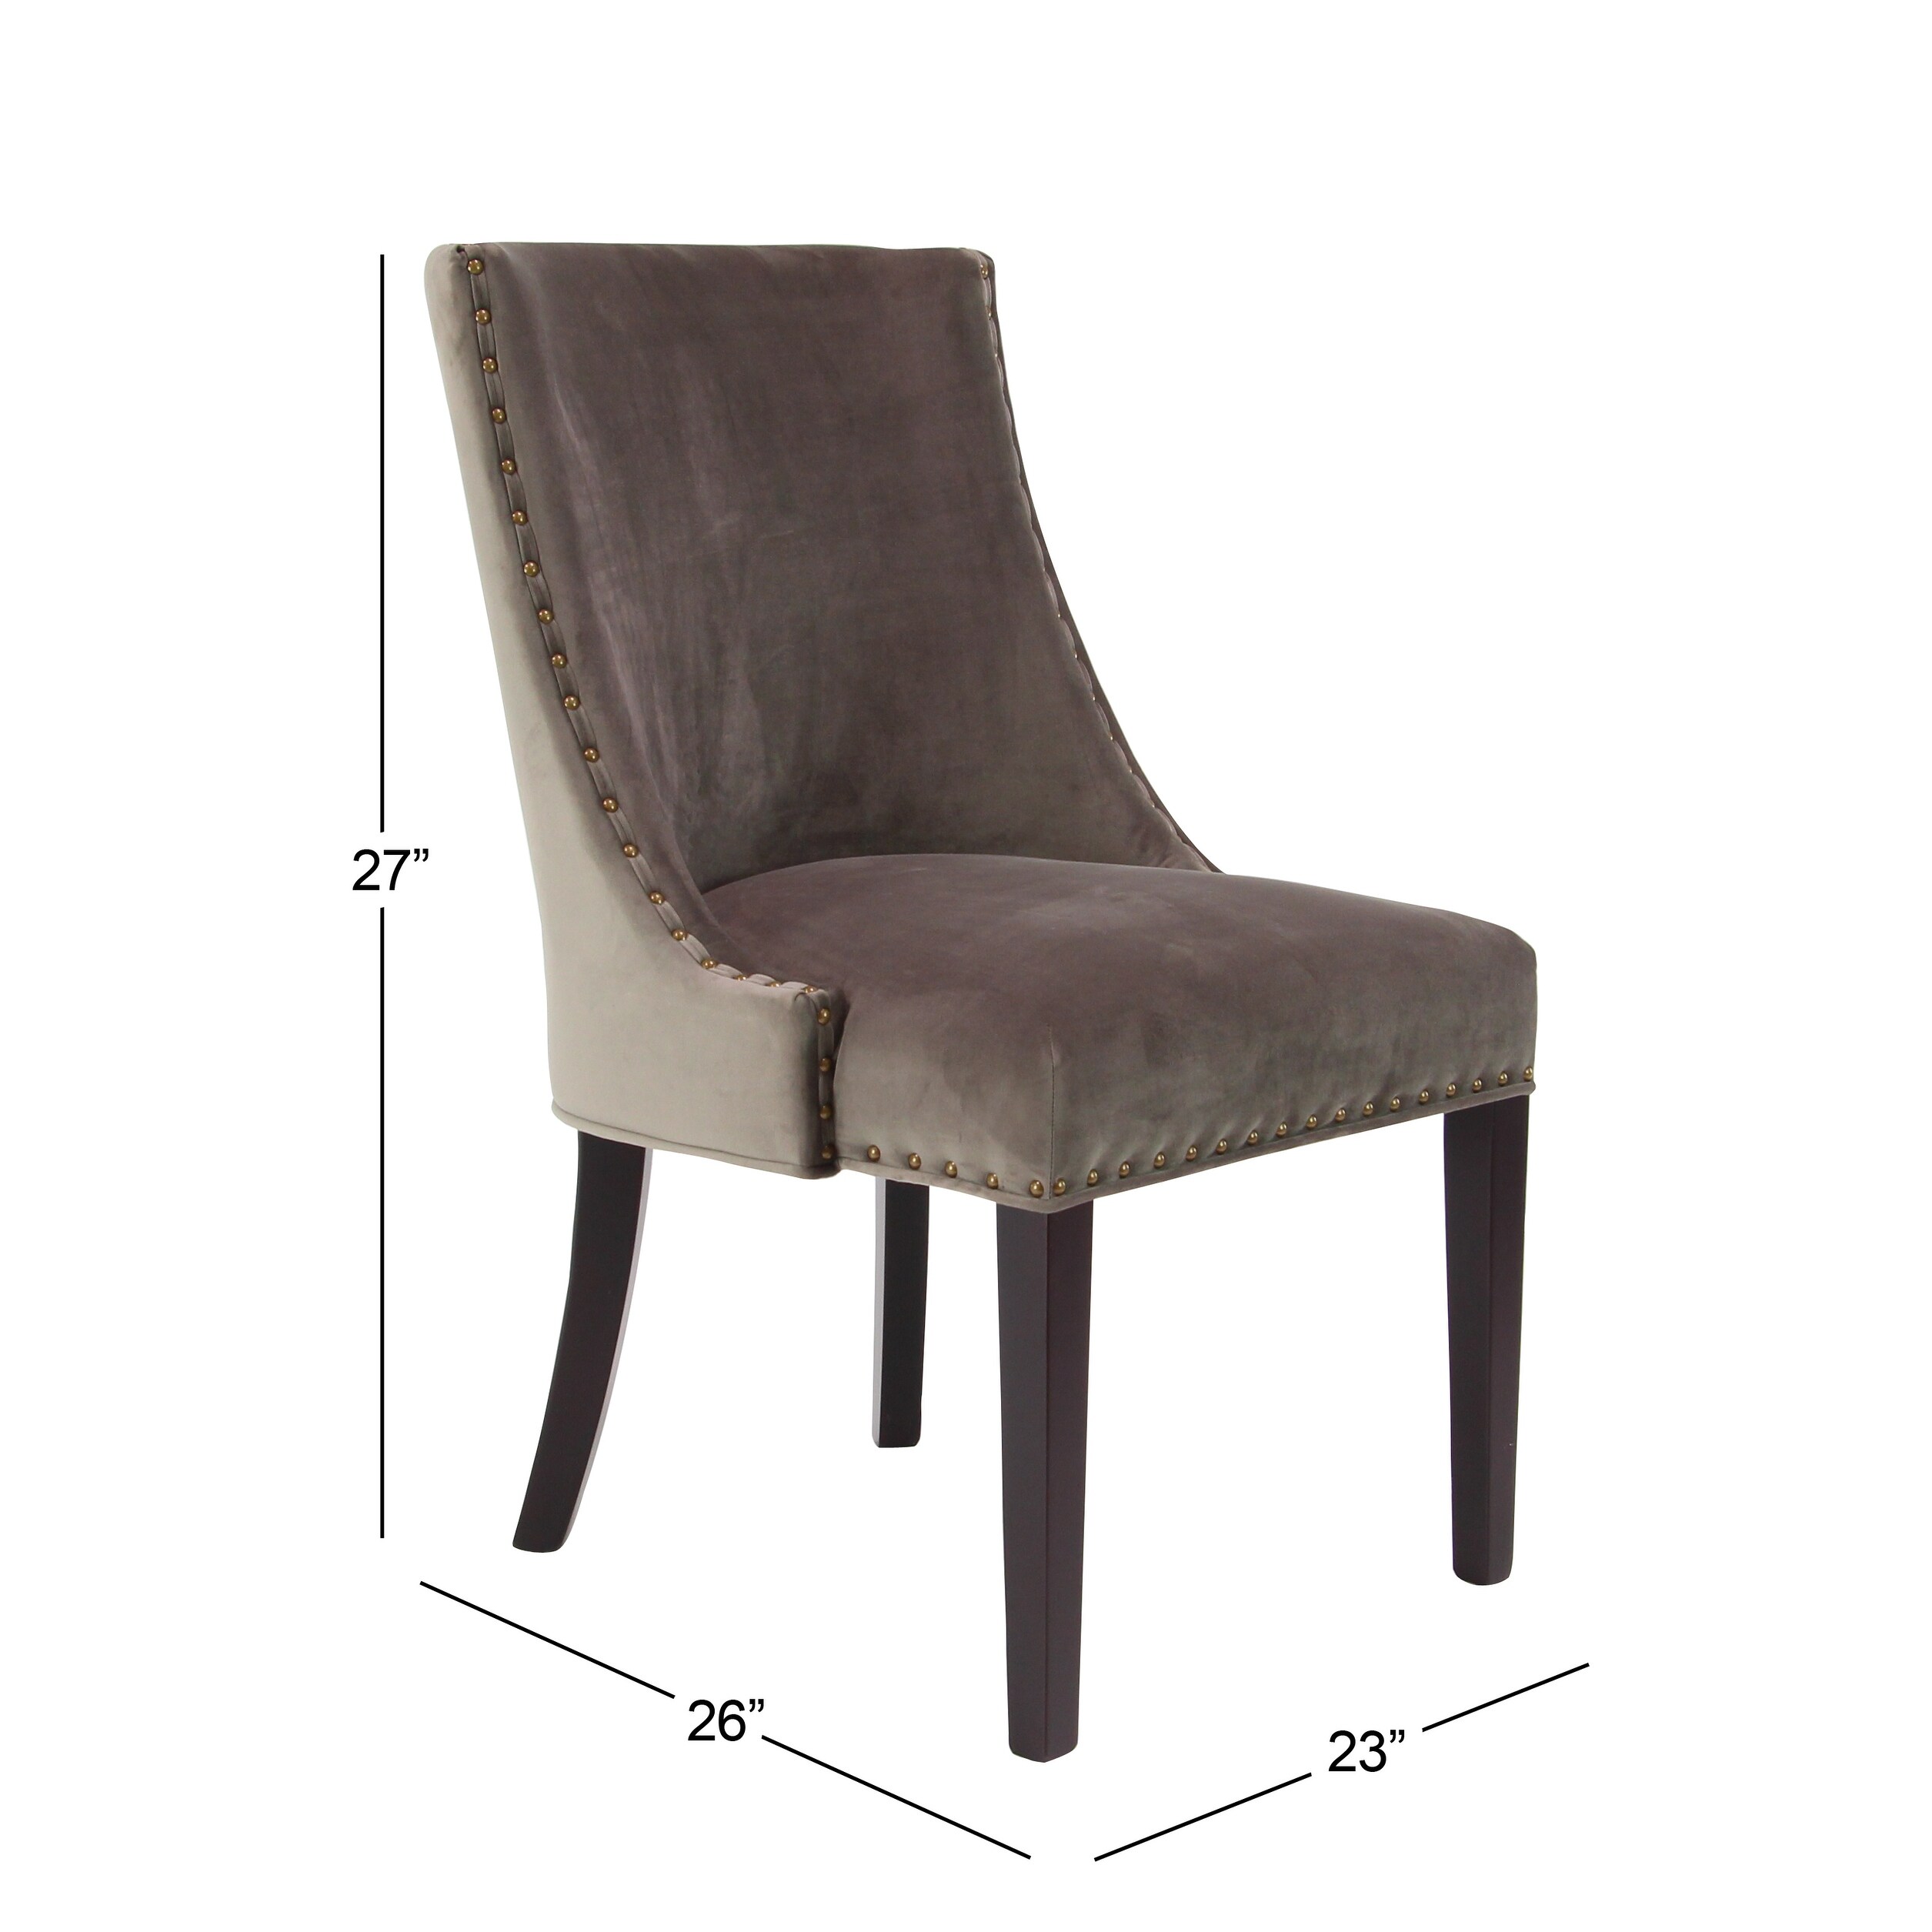 Gray or Taupe Wood Traditional Dining Chair (Set of 2) - 23 x 26 x 37 - Grey